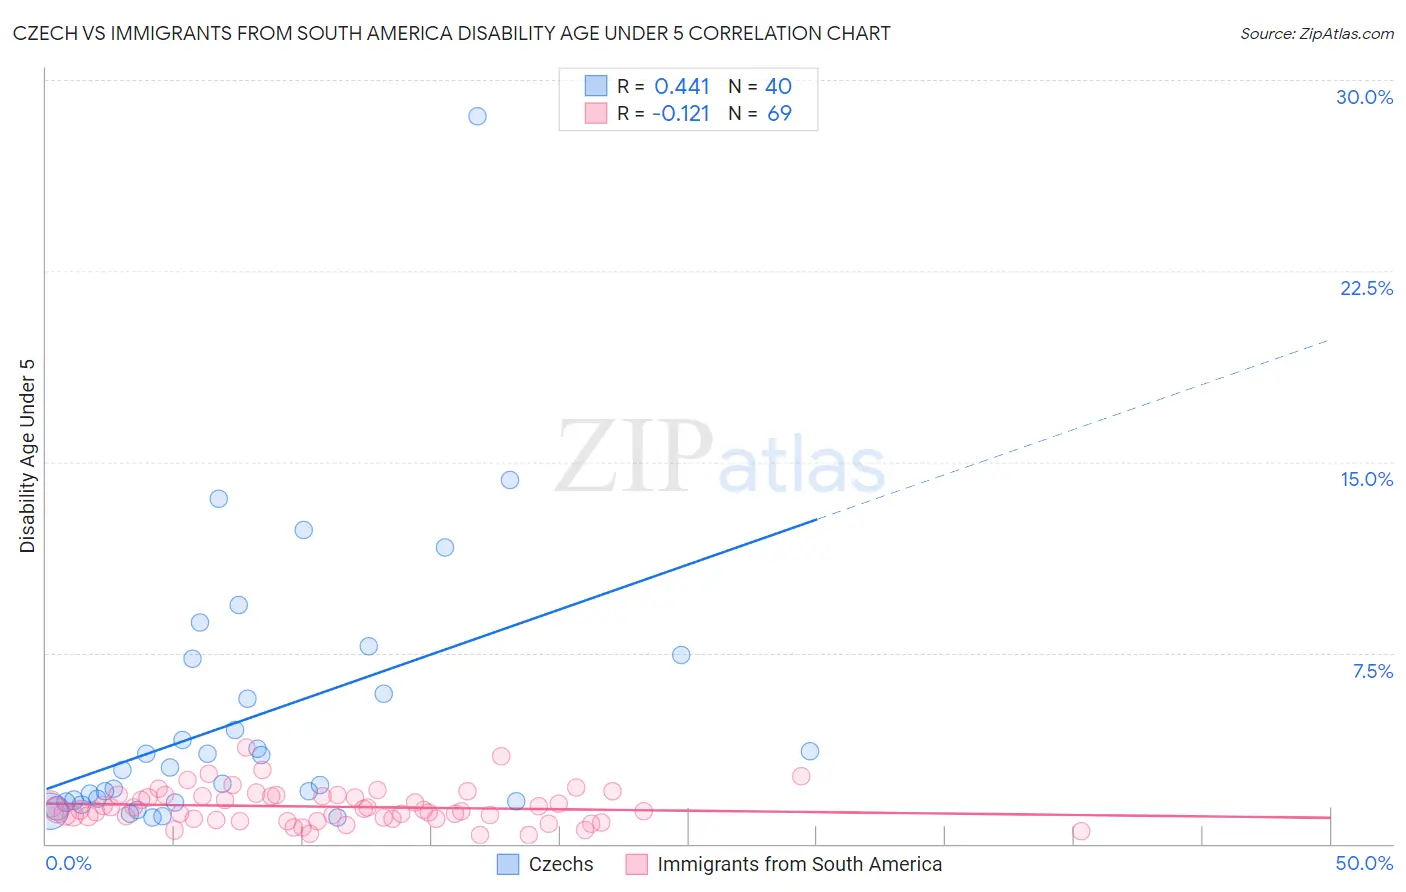 Czech vs Immigrants from South America Disability Age Under 5